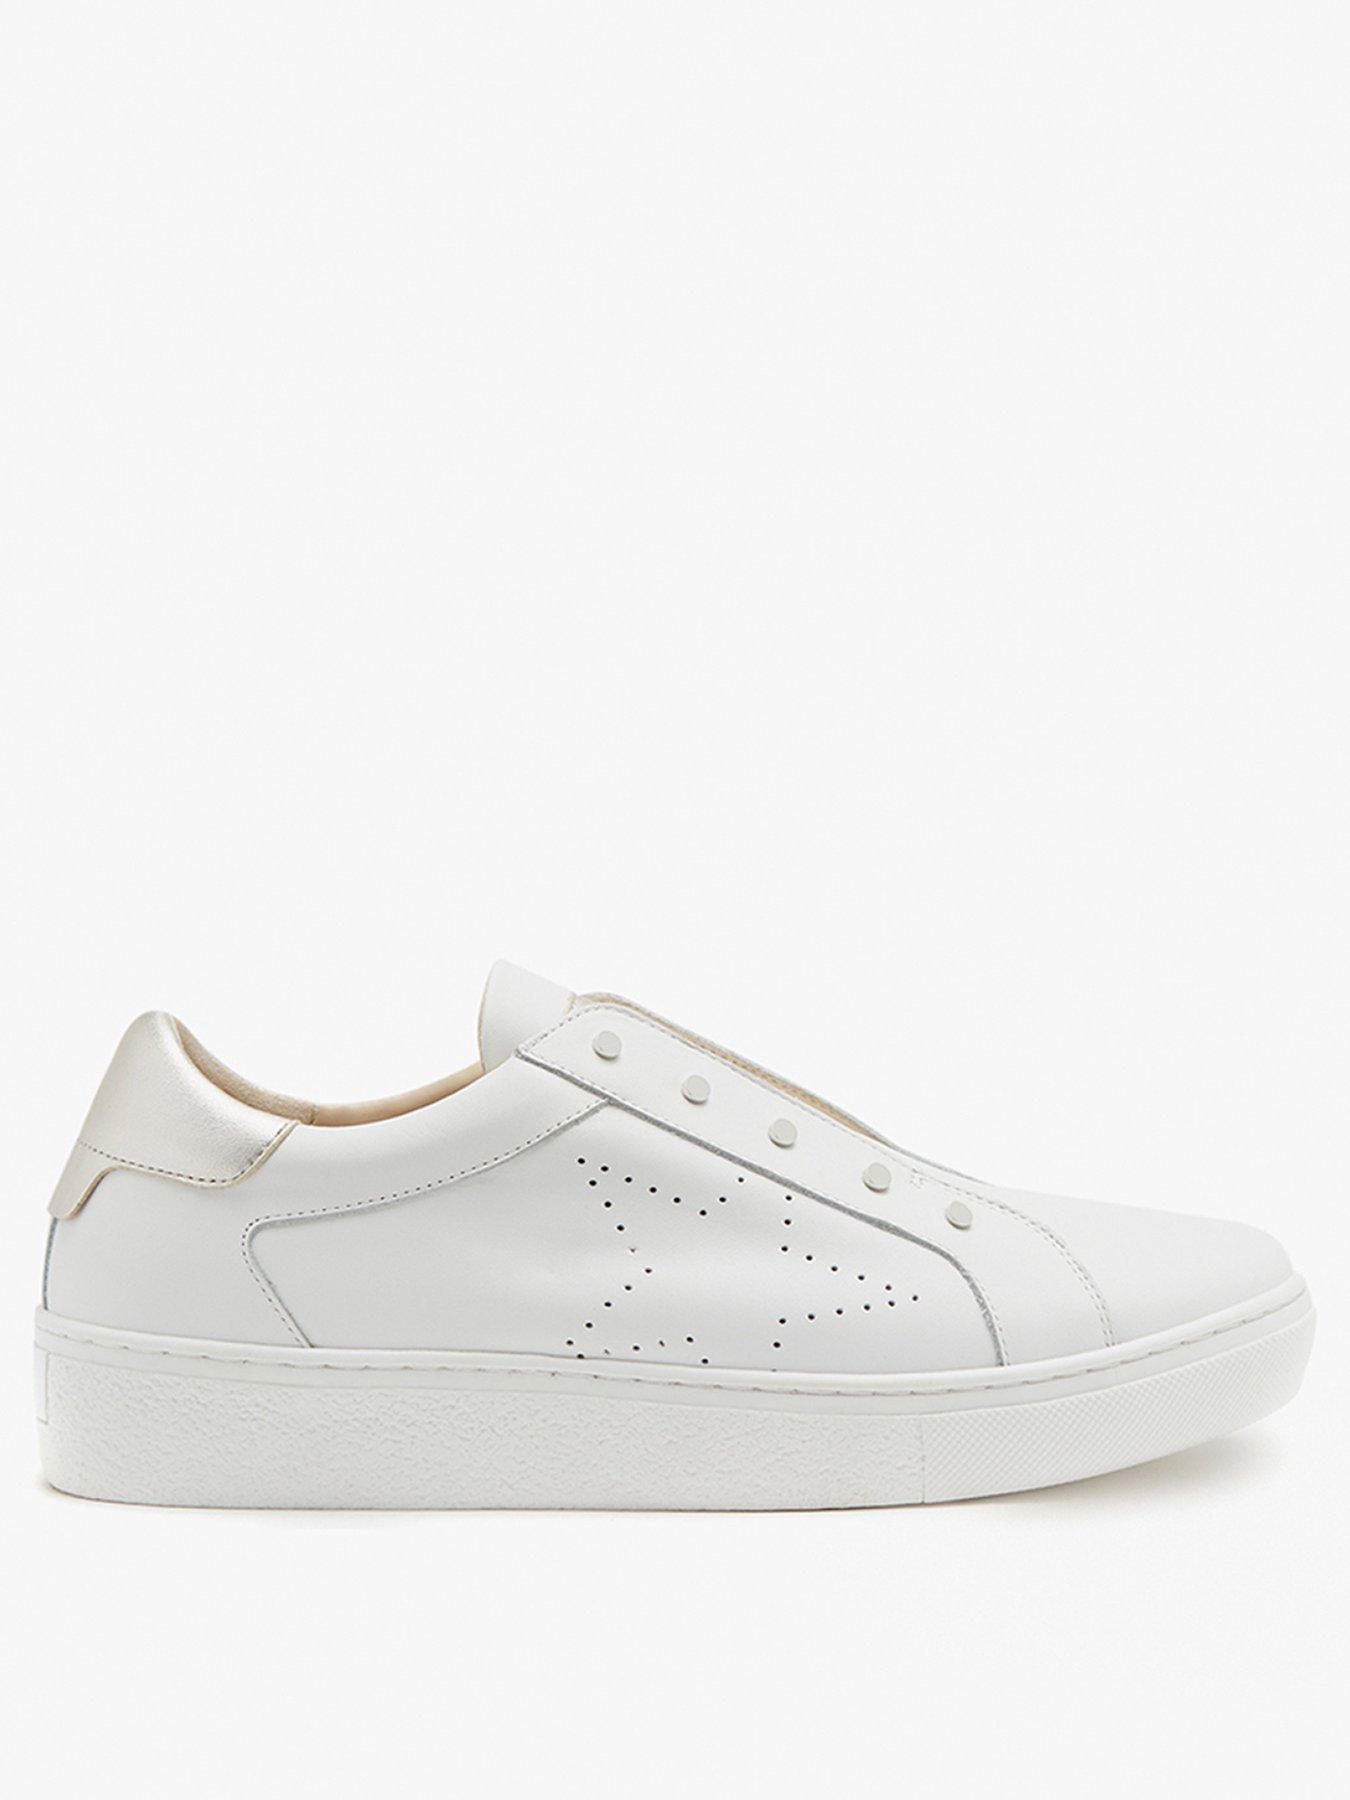 Trainers Indie Slip On Trainer - White